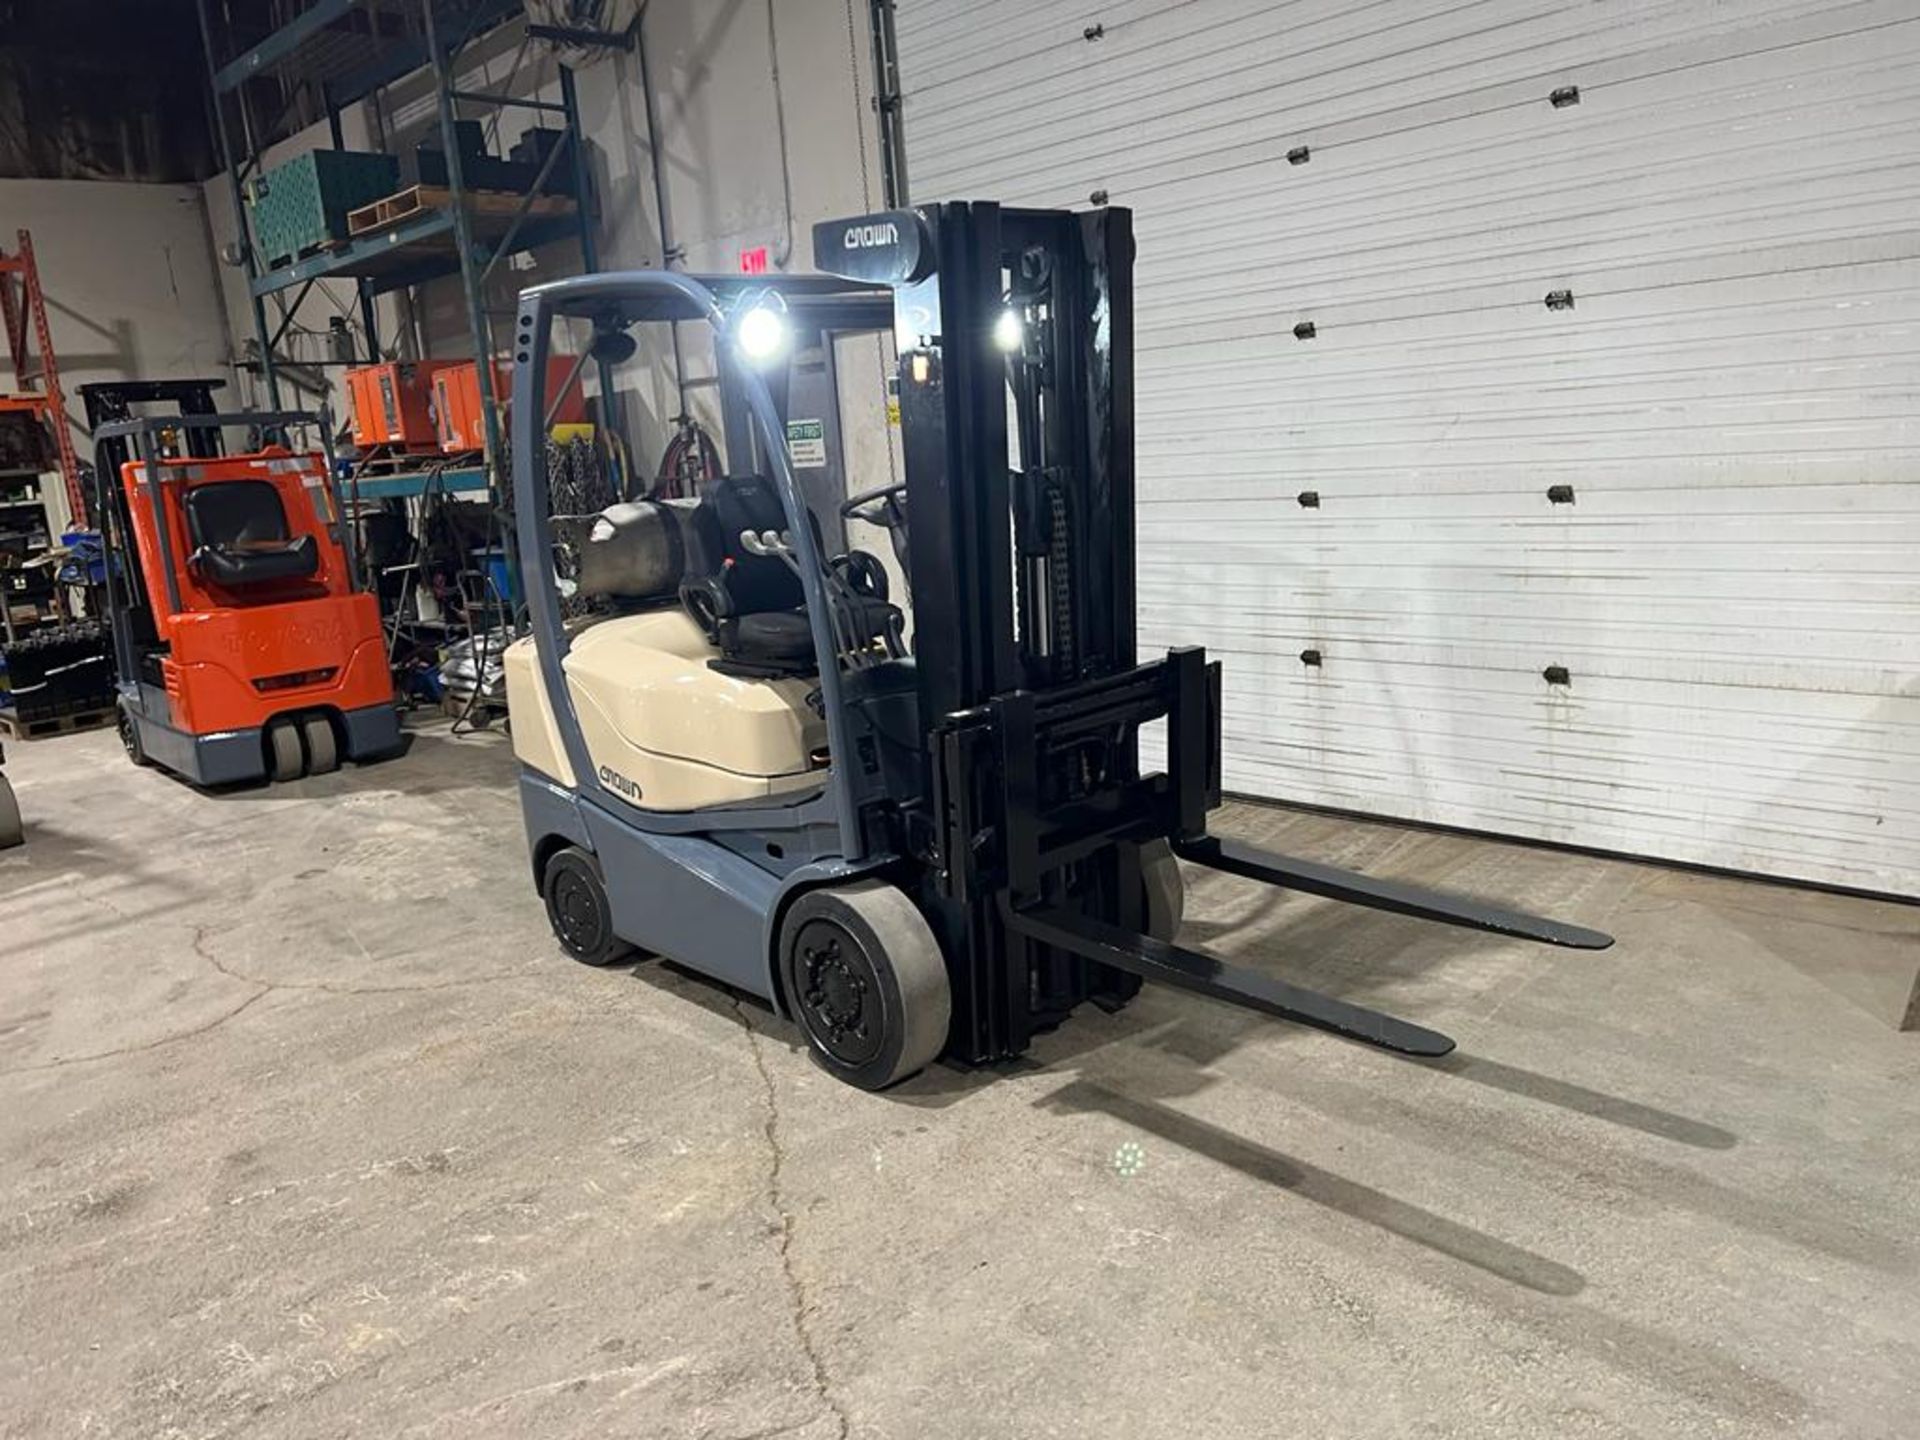 NICE 2016 Crown 5,000lbs Capacity Forklift LPG (propane) with Sideshift & 3-stage Mast (no propane - Image 4 of 4